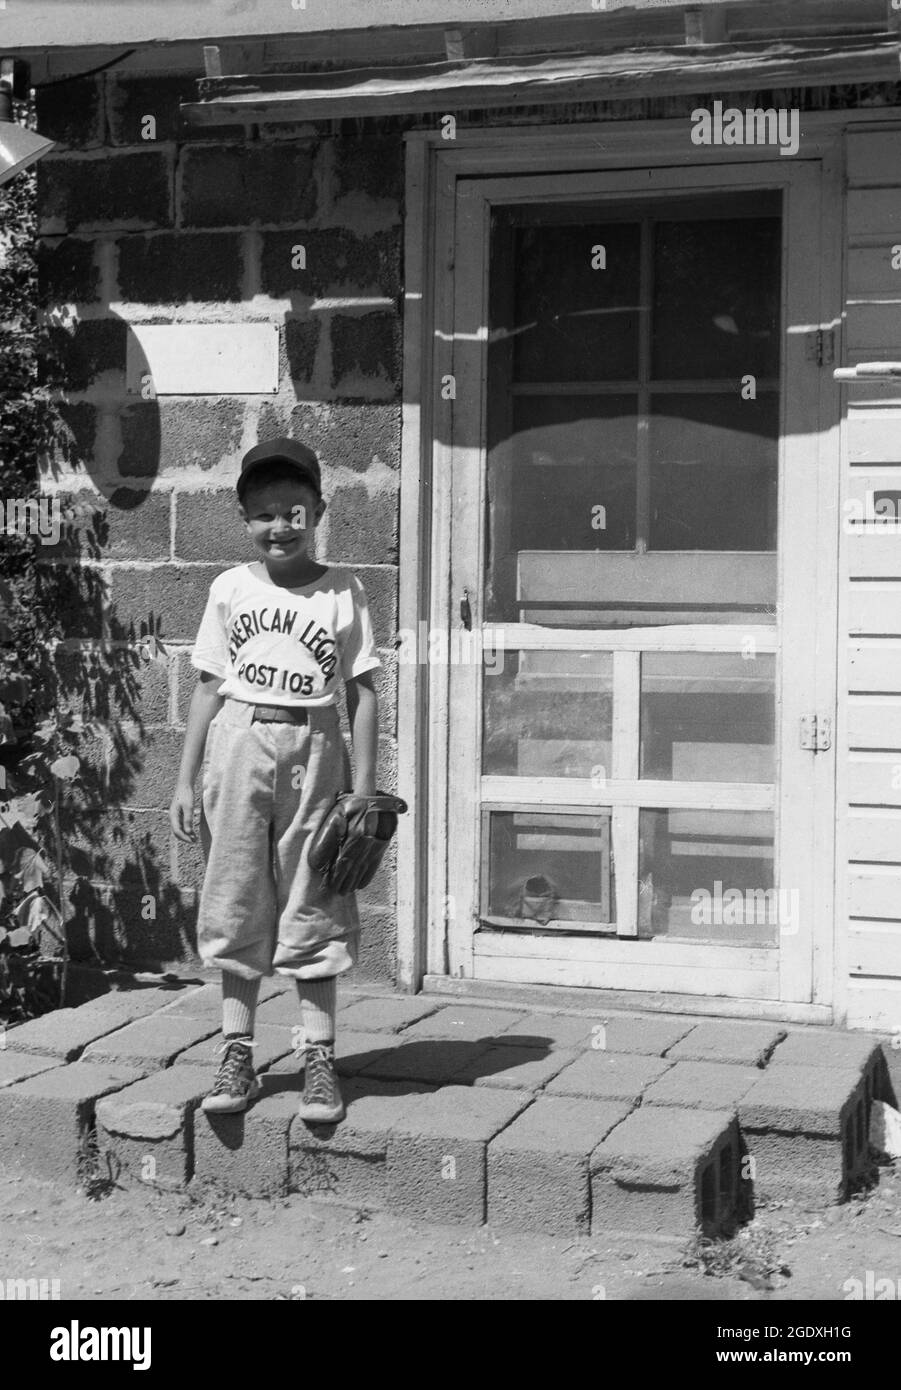 1950s, historical, starting young, it's summertime and outside the door to his home, a small boy standing for a photo in his basebal kit, cap and with pitchers glove, Des Monies, USA. On his baseball shirt is the wording 'American Legion'. Founded in 1925, American Legion Baseball was a program set up to provide a national baseball tournament for teenagers, with the objective to teach young Americans the importance of sportsmanship, good health and active citizenship. Stock Photo